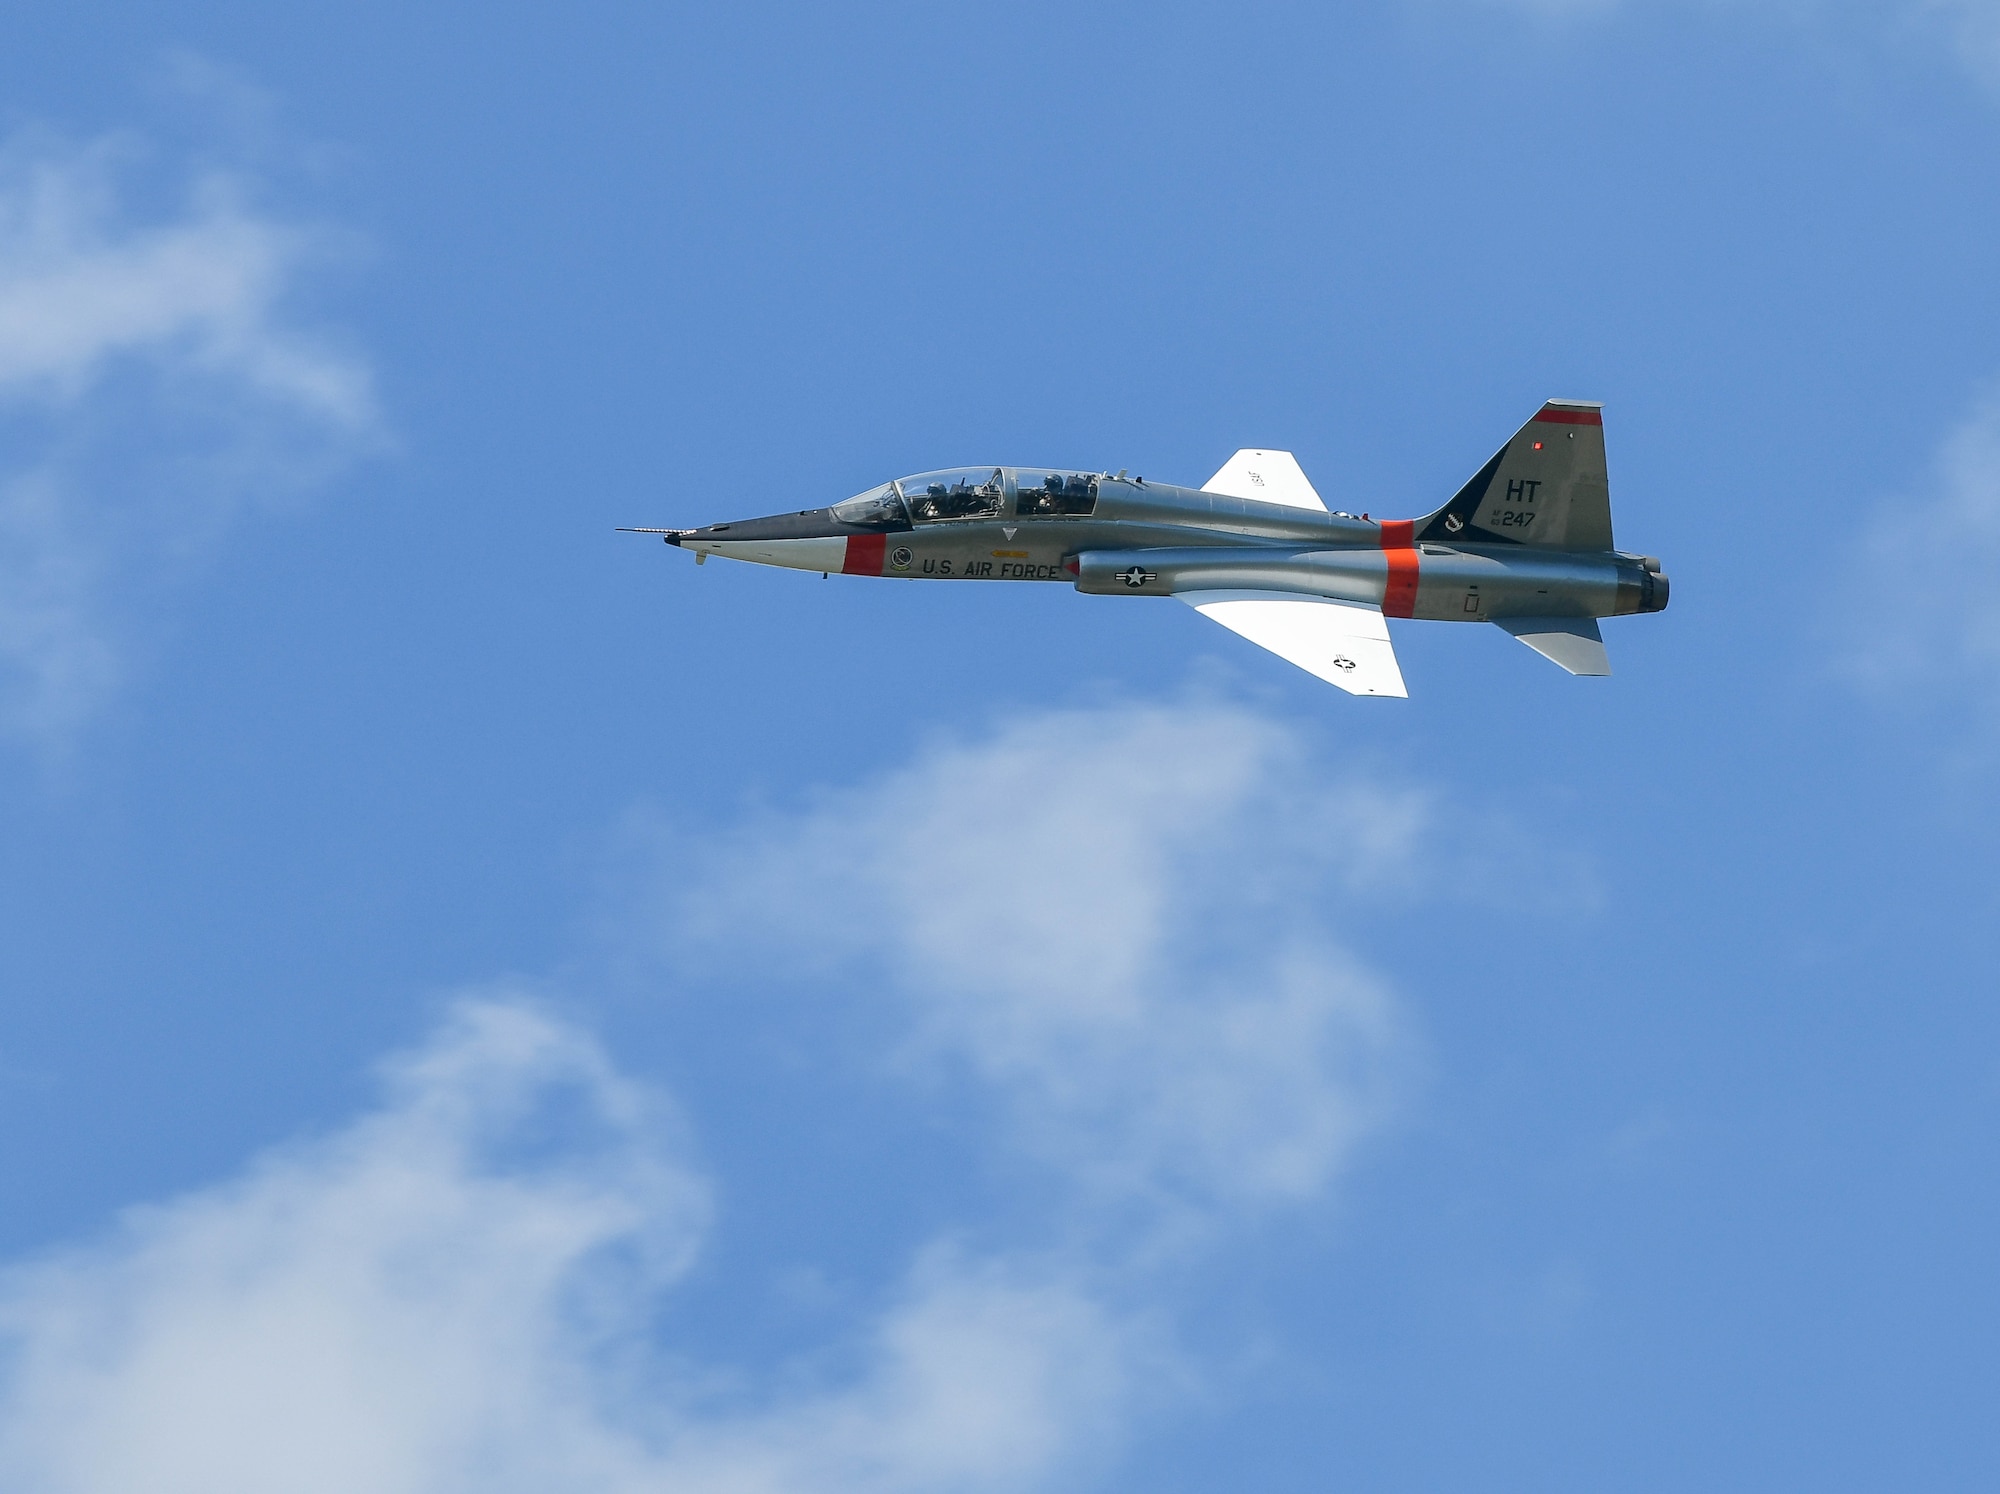 A T-38 Talon is flown over Arnold Air Force Base by Airmen of the 586th Flight Test Squadron, 704th Test Group, Arnold Engineering Development Complex, during a flag retreat ceremony after the AEDC “Hap Arnold Day” 70th Anniversary June 26, 2021. The aircraft was flown by Lt. Col. Alex “Cuda” Wolfard and Maj. Ali “Axle” Hamidani. (U.S. Air Force photo by Jill Pickett)